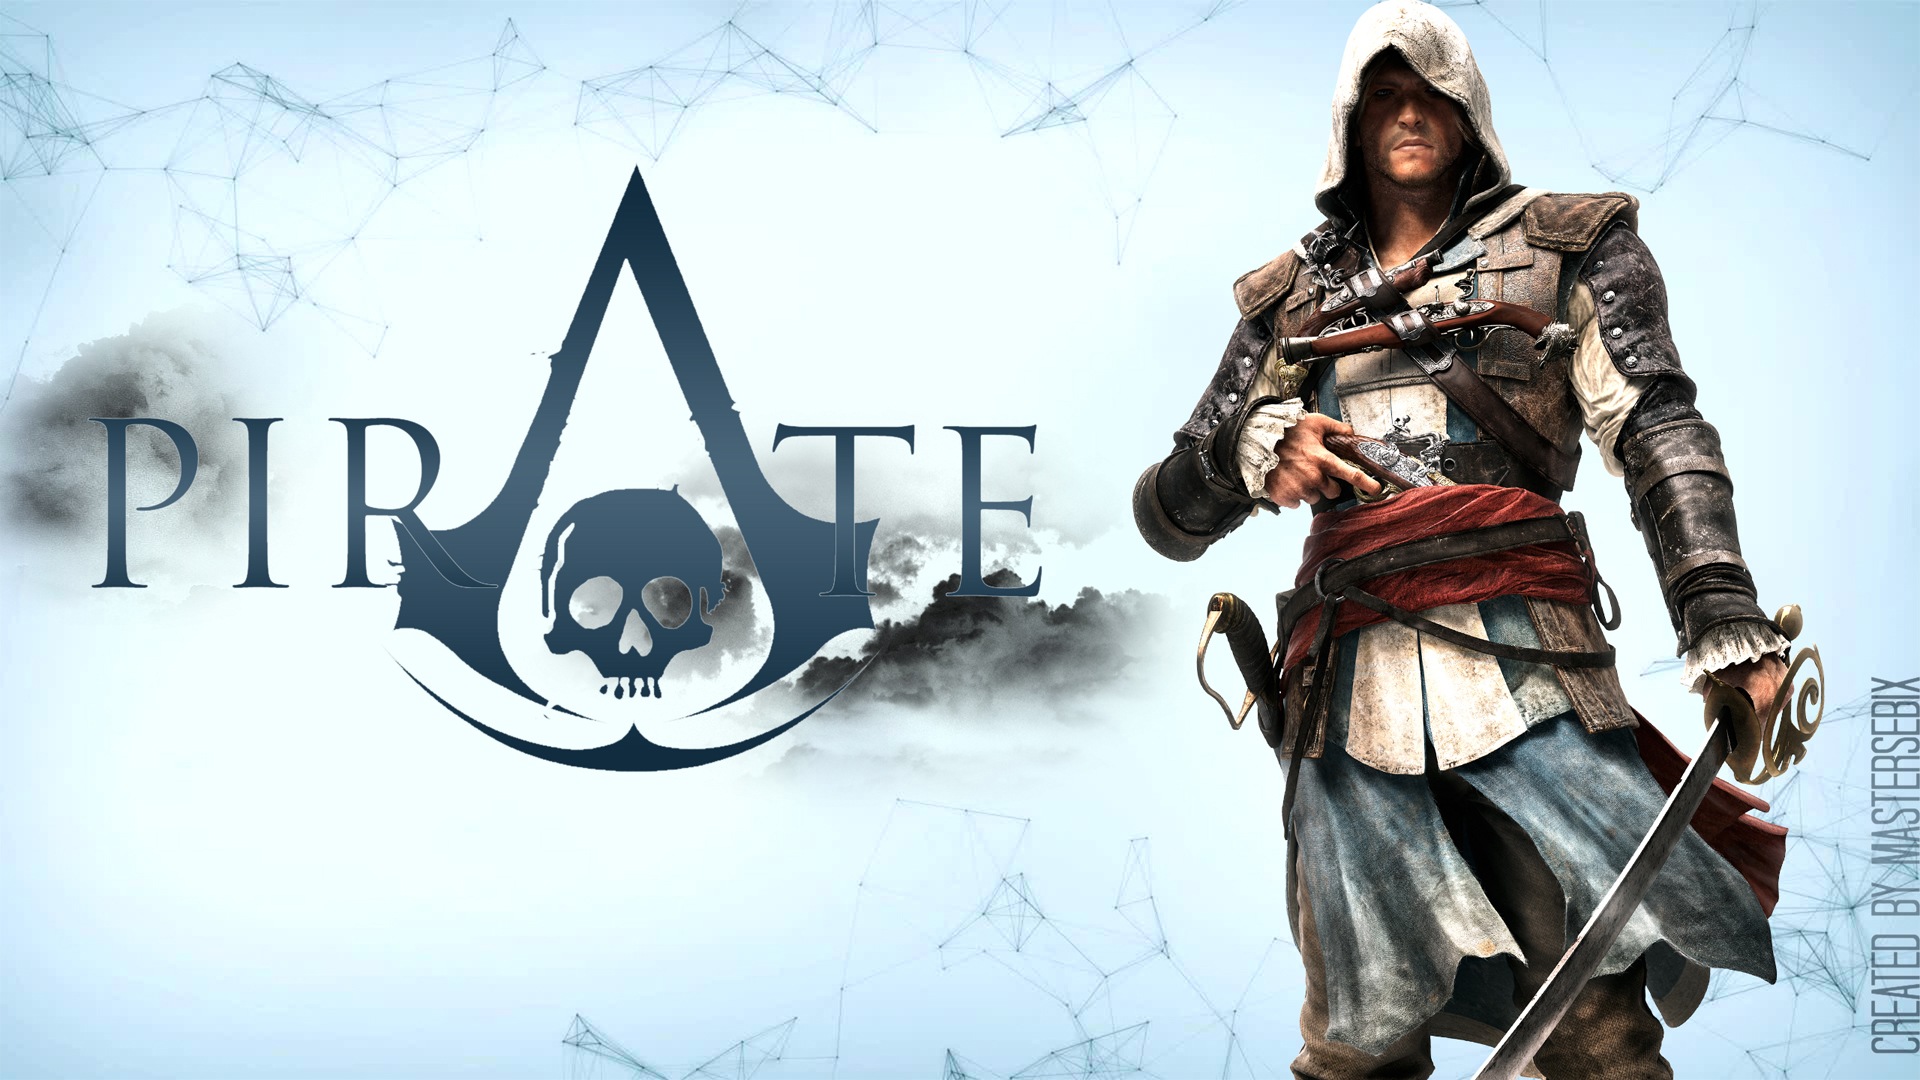 Creed IV Assassin: Black Flag HD wallpapers #18 - 1920x1080